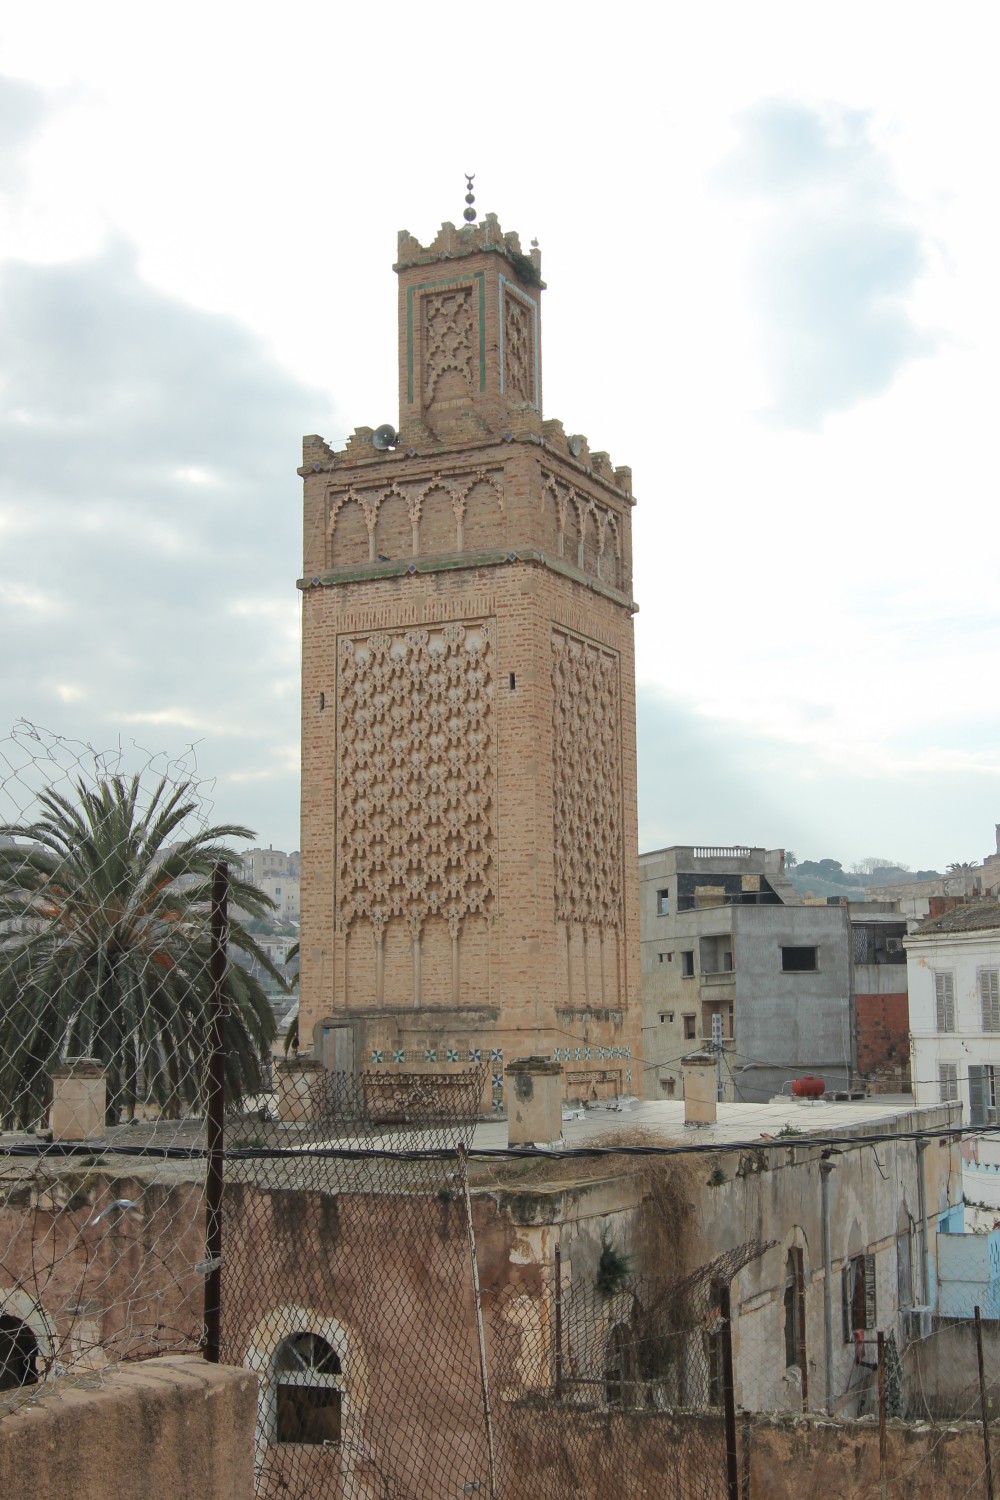 Full view of the minaret from north-east showing diamond patterns and lantern